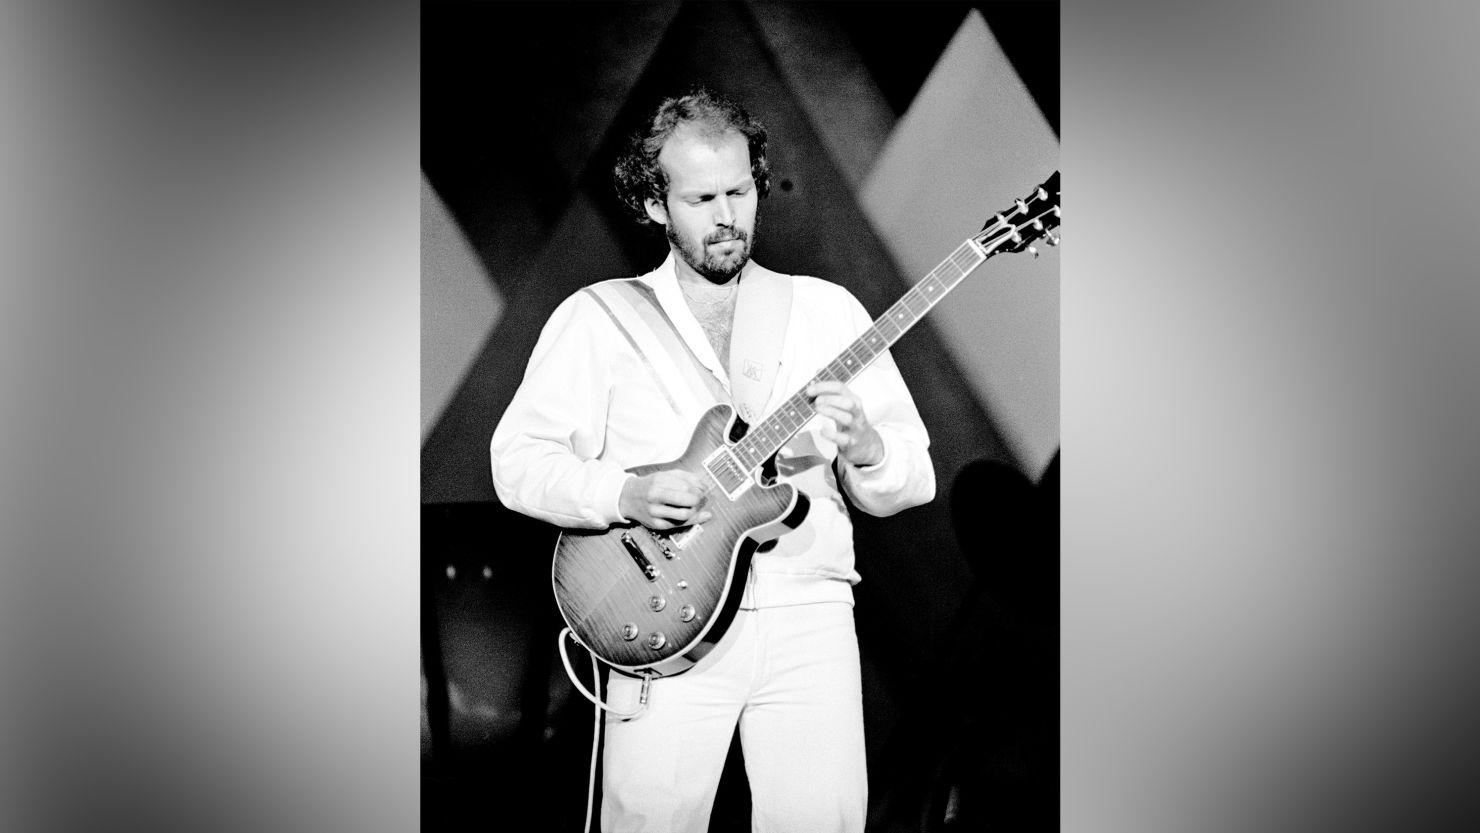 Lasse Wellander, pictured on stage at the Wembley Arena, London, England, on November 5, 1979 became the main guitarist on ABBA's albums.